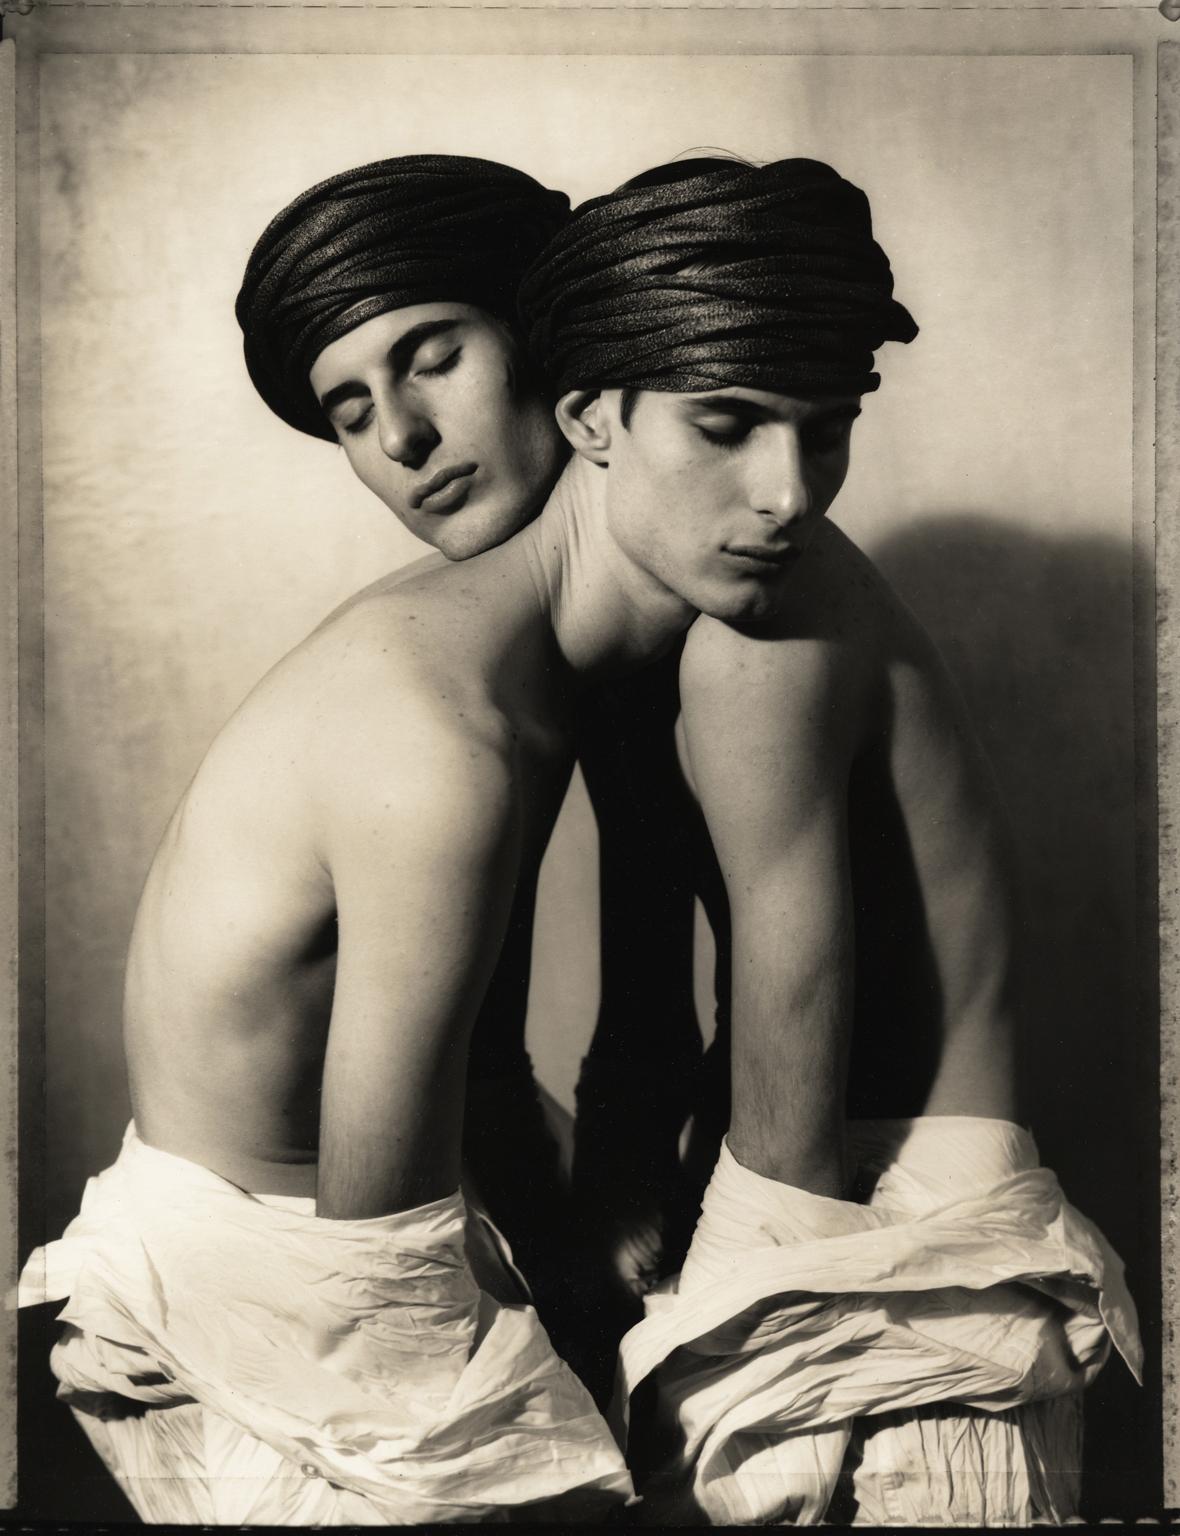 Twins Entwined, 1991: Identical twins photographed together in studio portrait. For Sale 1